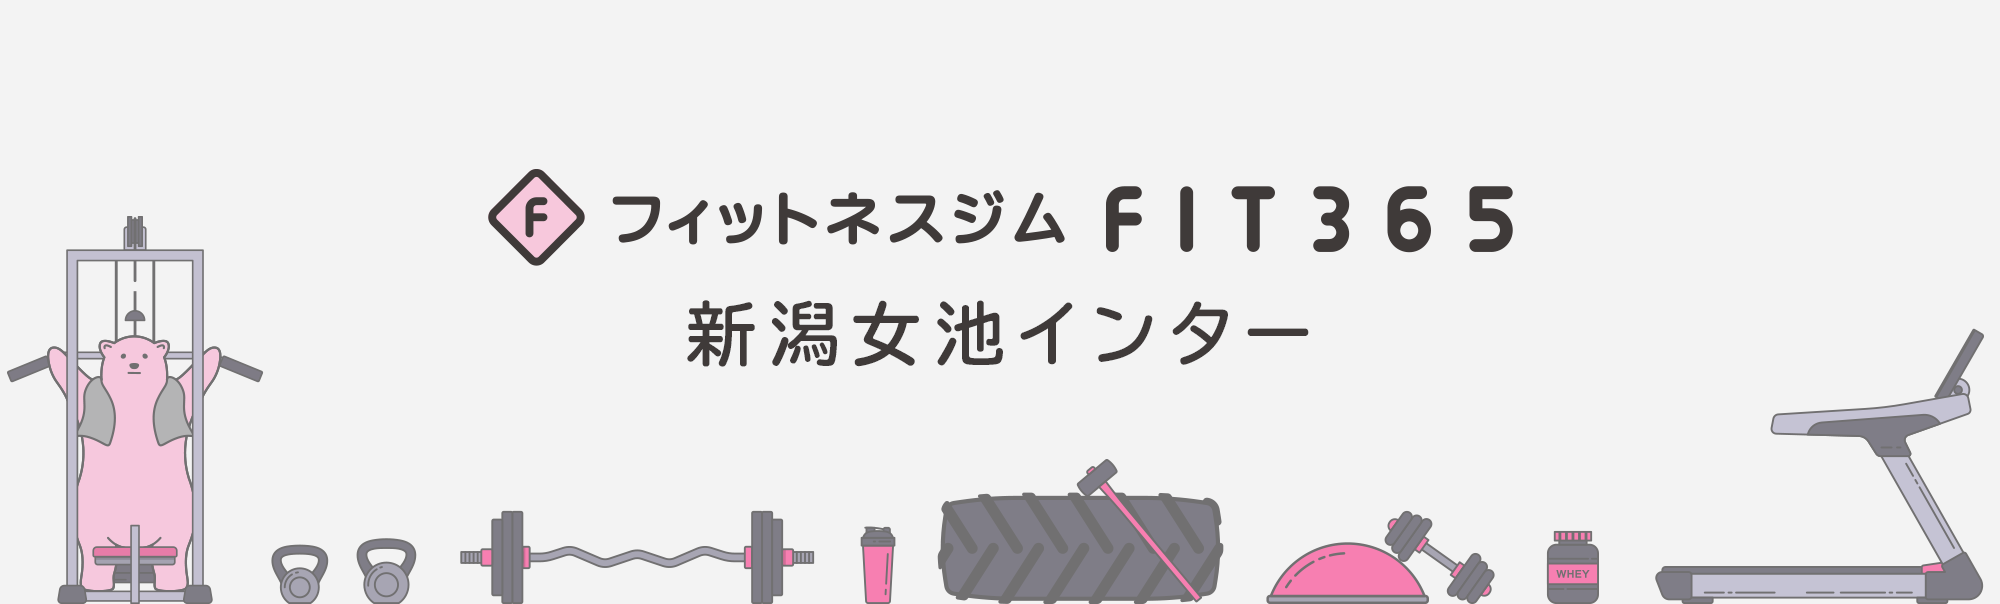 FIT365 新潟女池インター